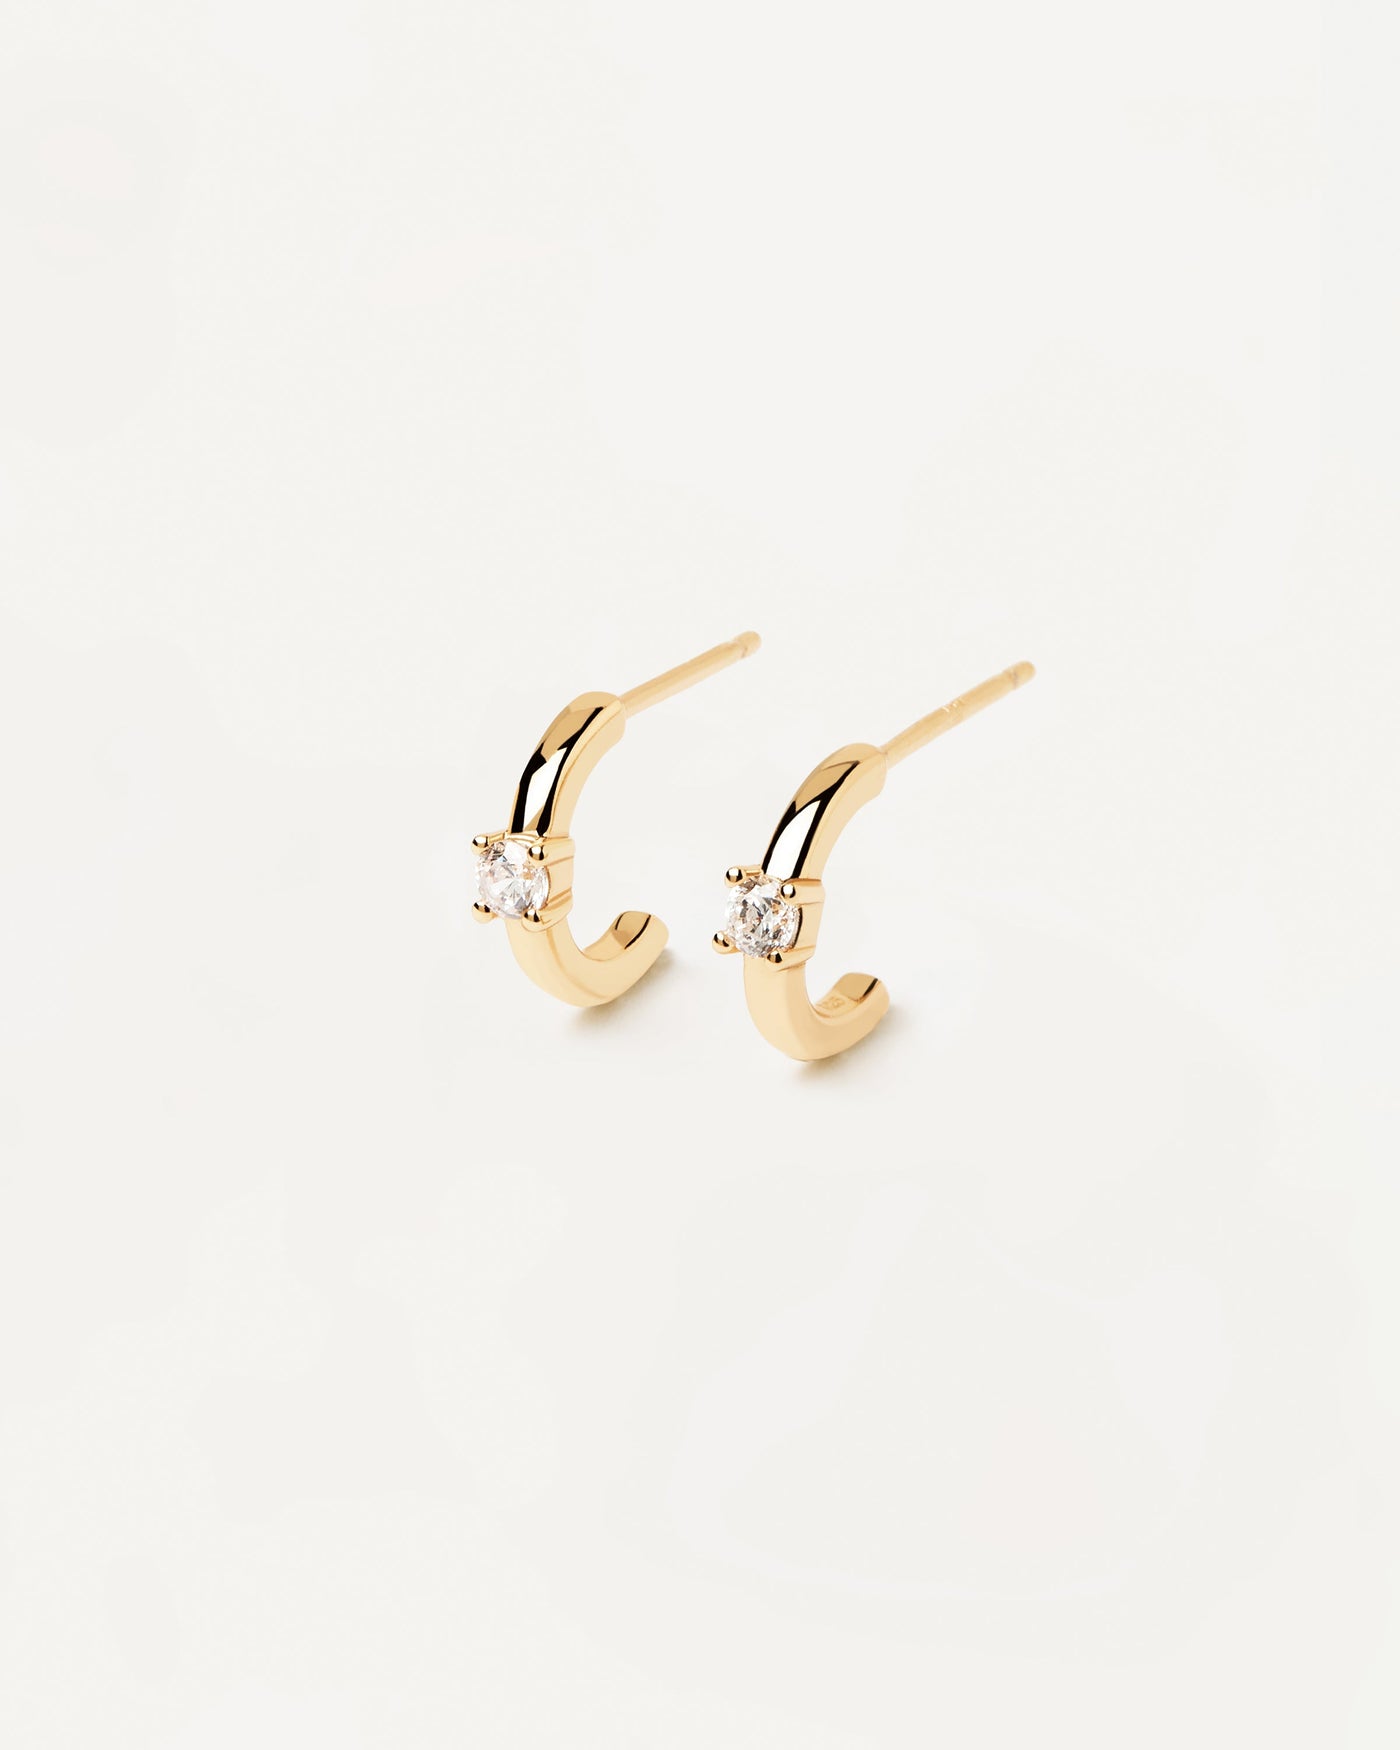 2023 Selection | White Solitary Earrings. 18k gold plated silver c hoops with a round-cut white zirconia stone set on prongs. Get the latest arrival from PDPAOLA. Place your order safely and get this Best Seller. Free Shipping.